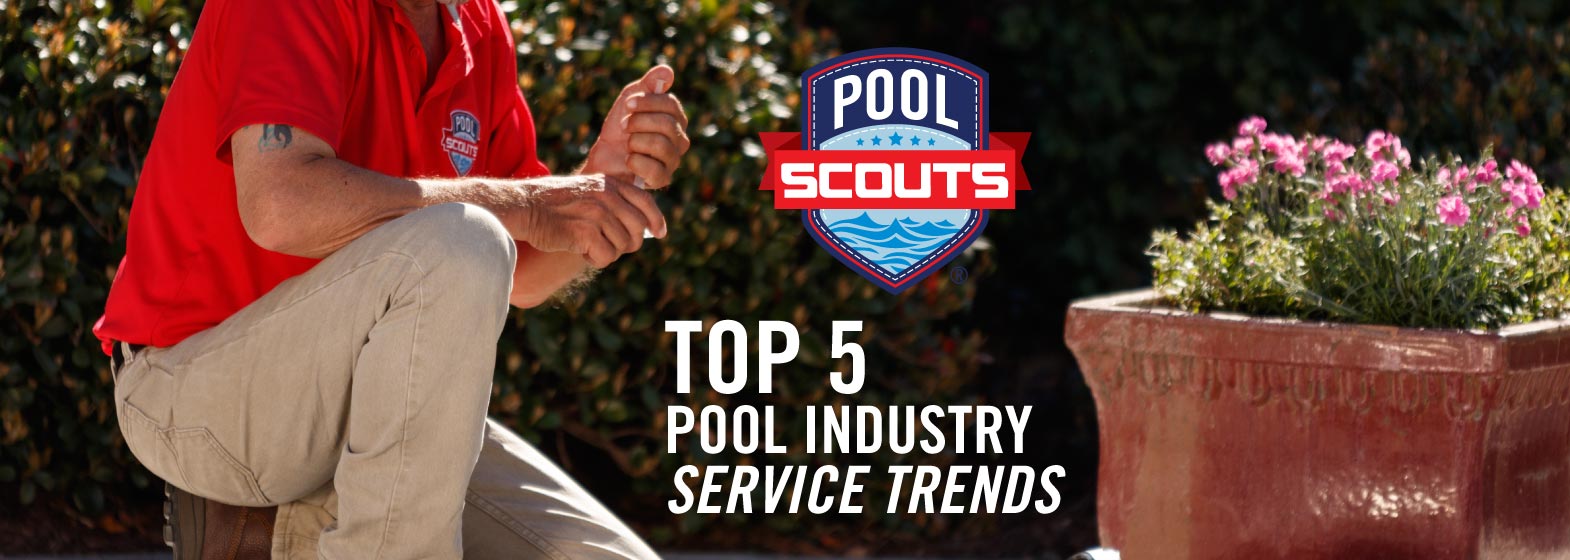 Image of Top 5 Pool Industry Service Trends 